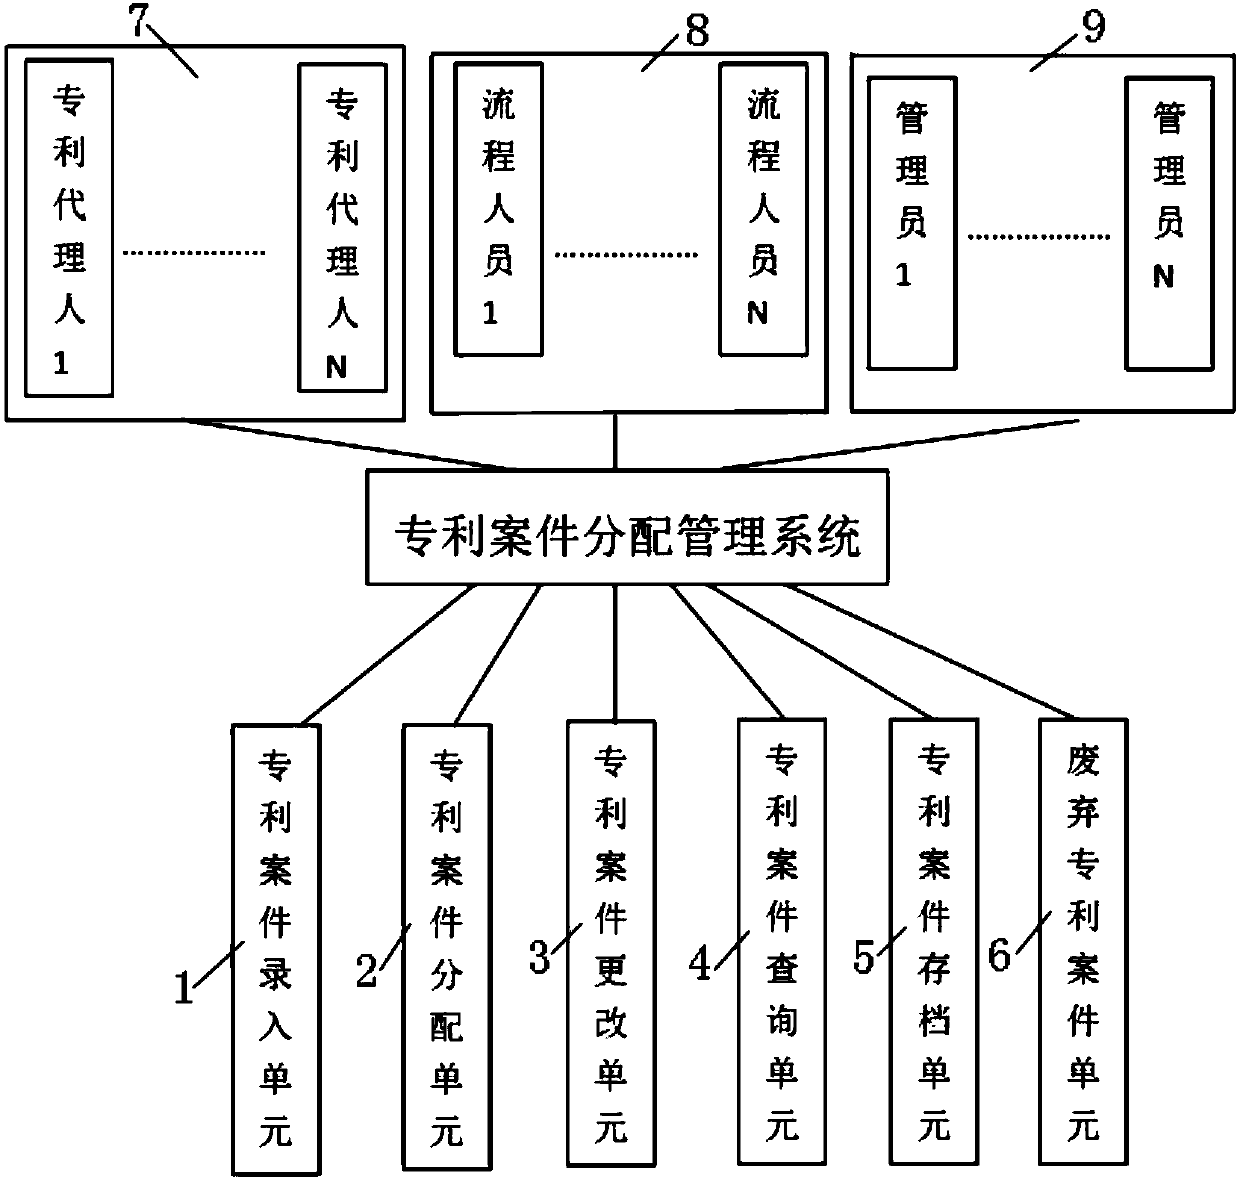 Patent case distribution management system and working method thereof